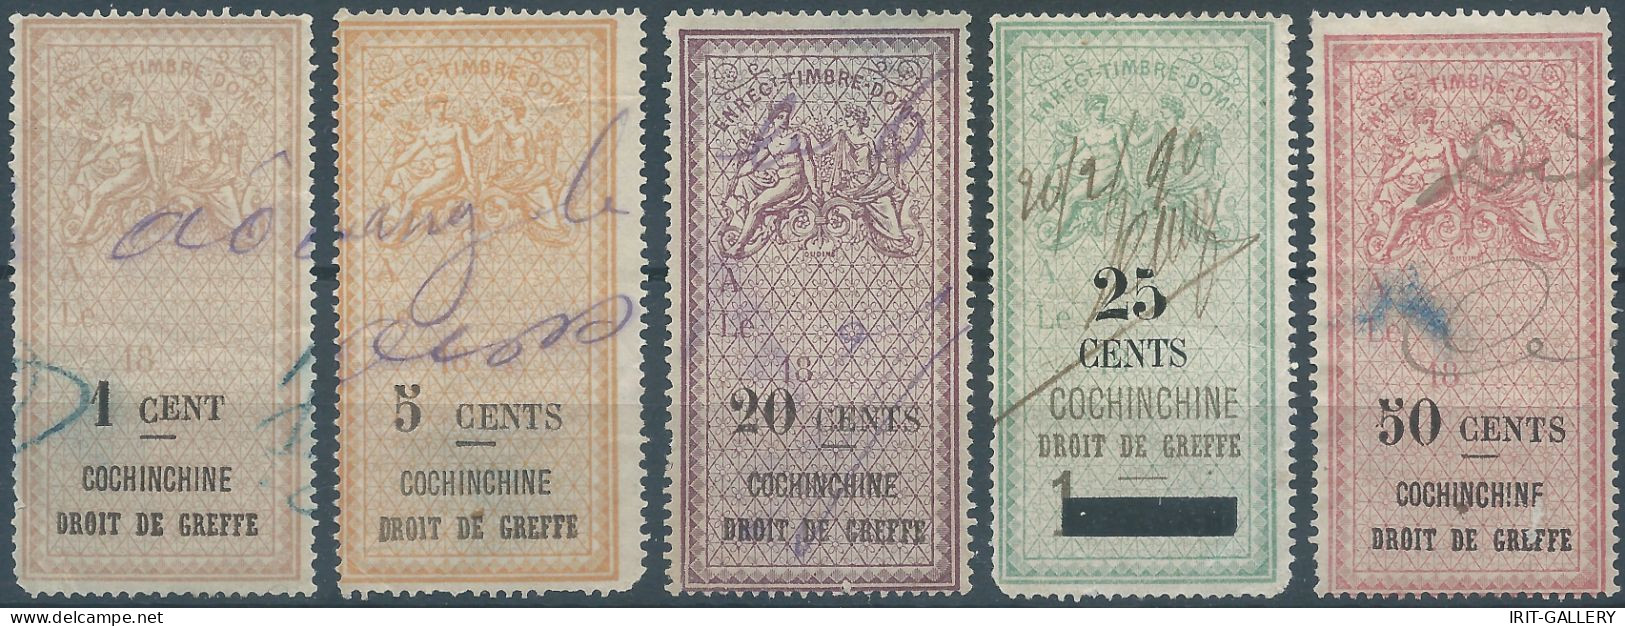 FRANCE,Cochinchine , Revenue Stamp Tax Fiscal DROIT DE GREFFE,1c-5c-20c-25c-50cents,Used - Very Old - Used Stamps